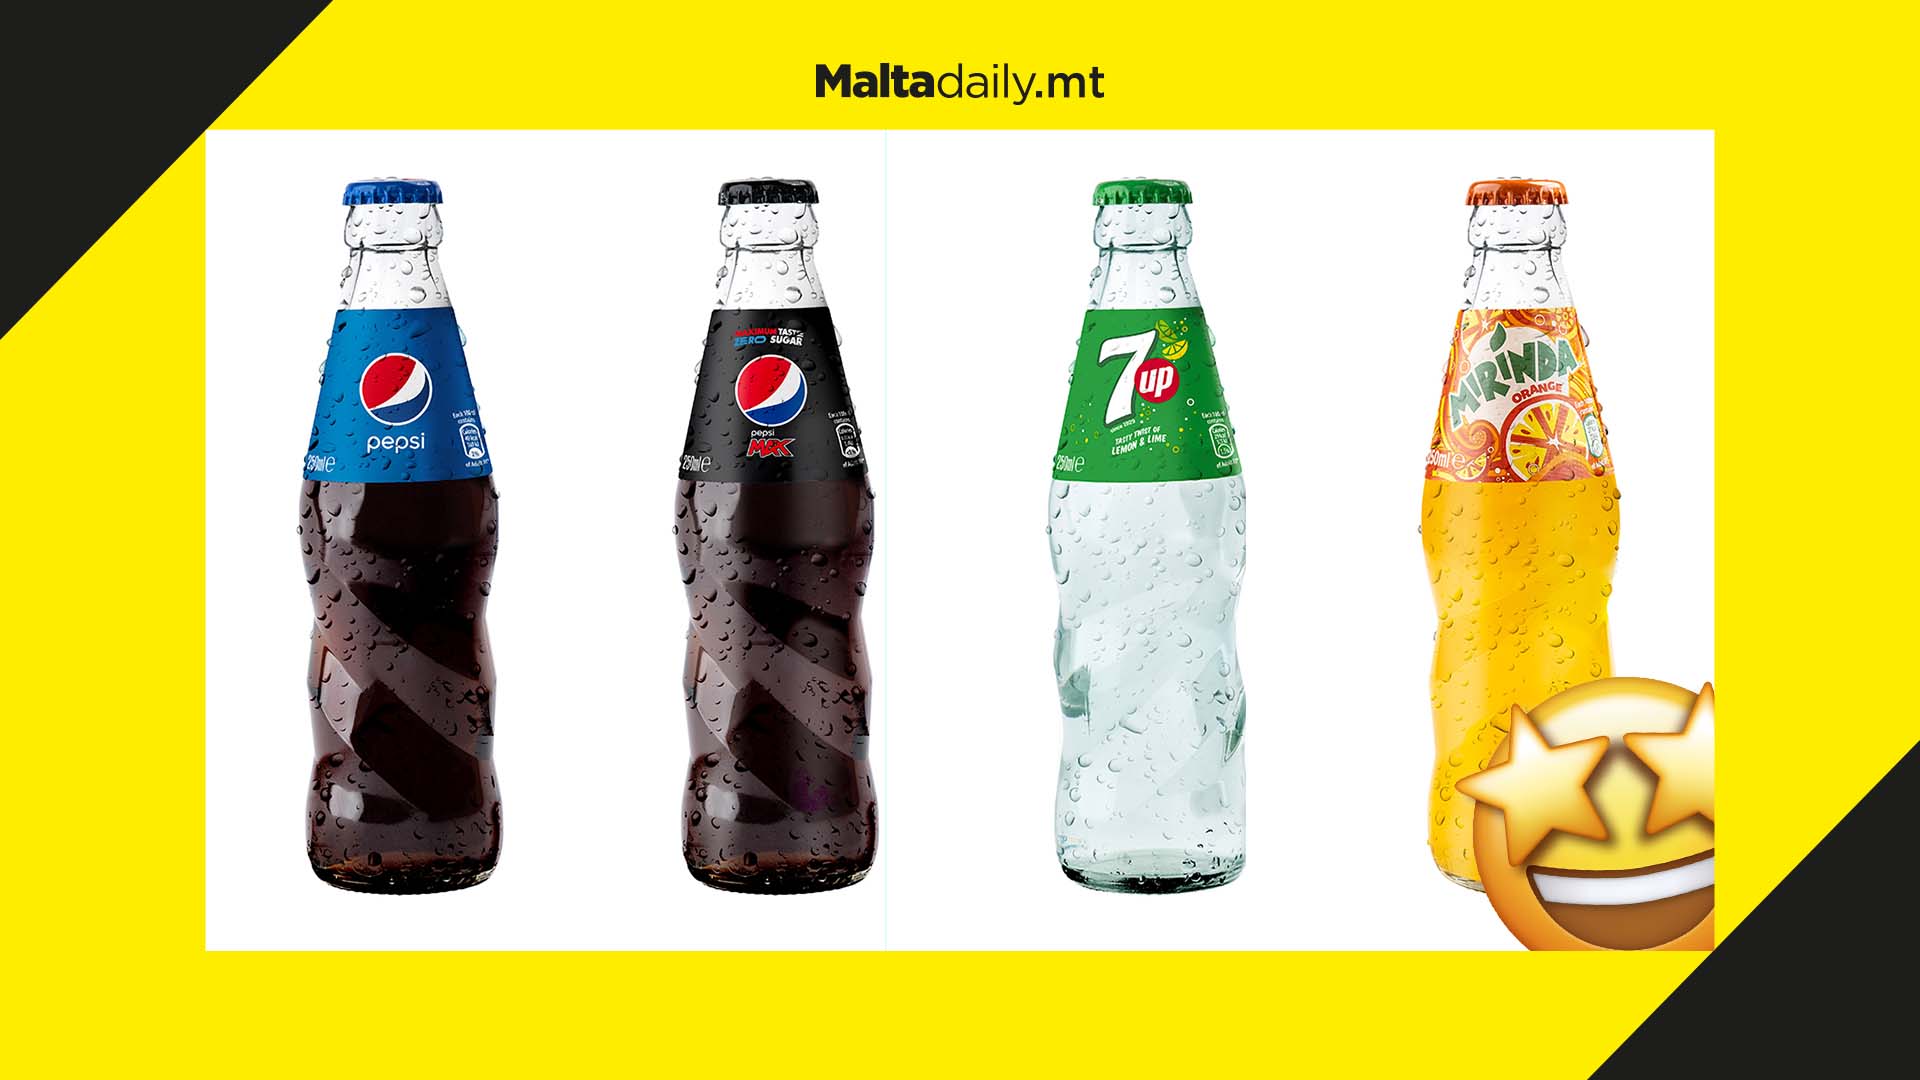 Glass bottles are back! PepsiCo brands now available in new refillable bottle